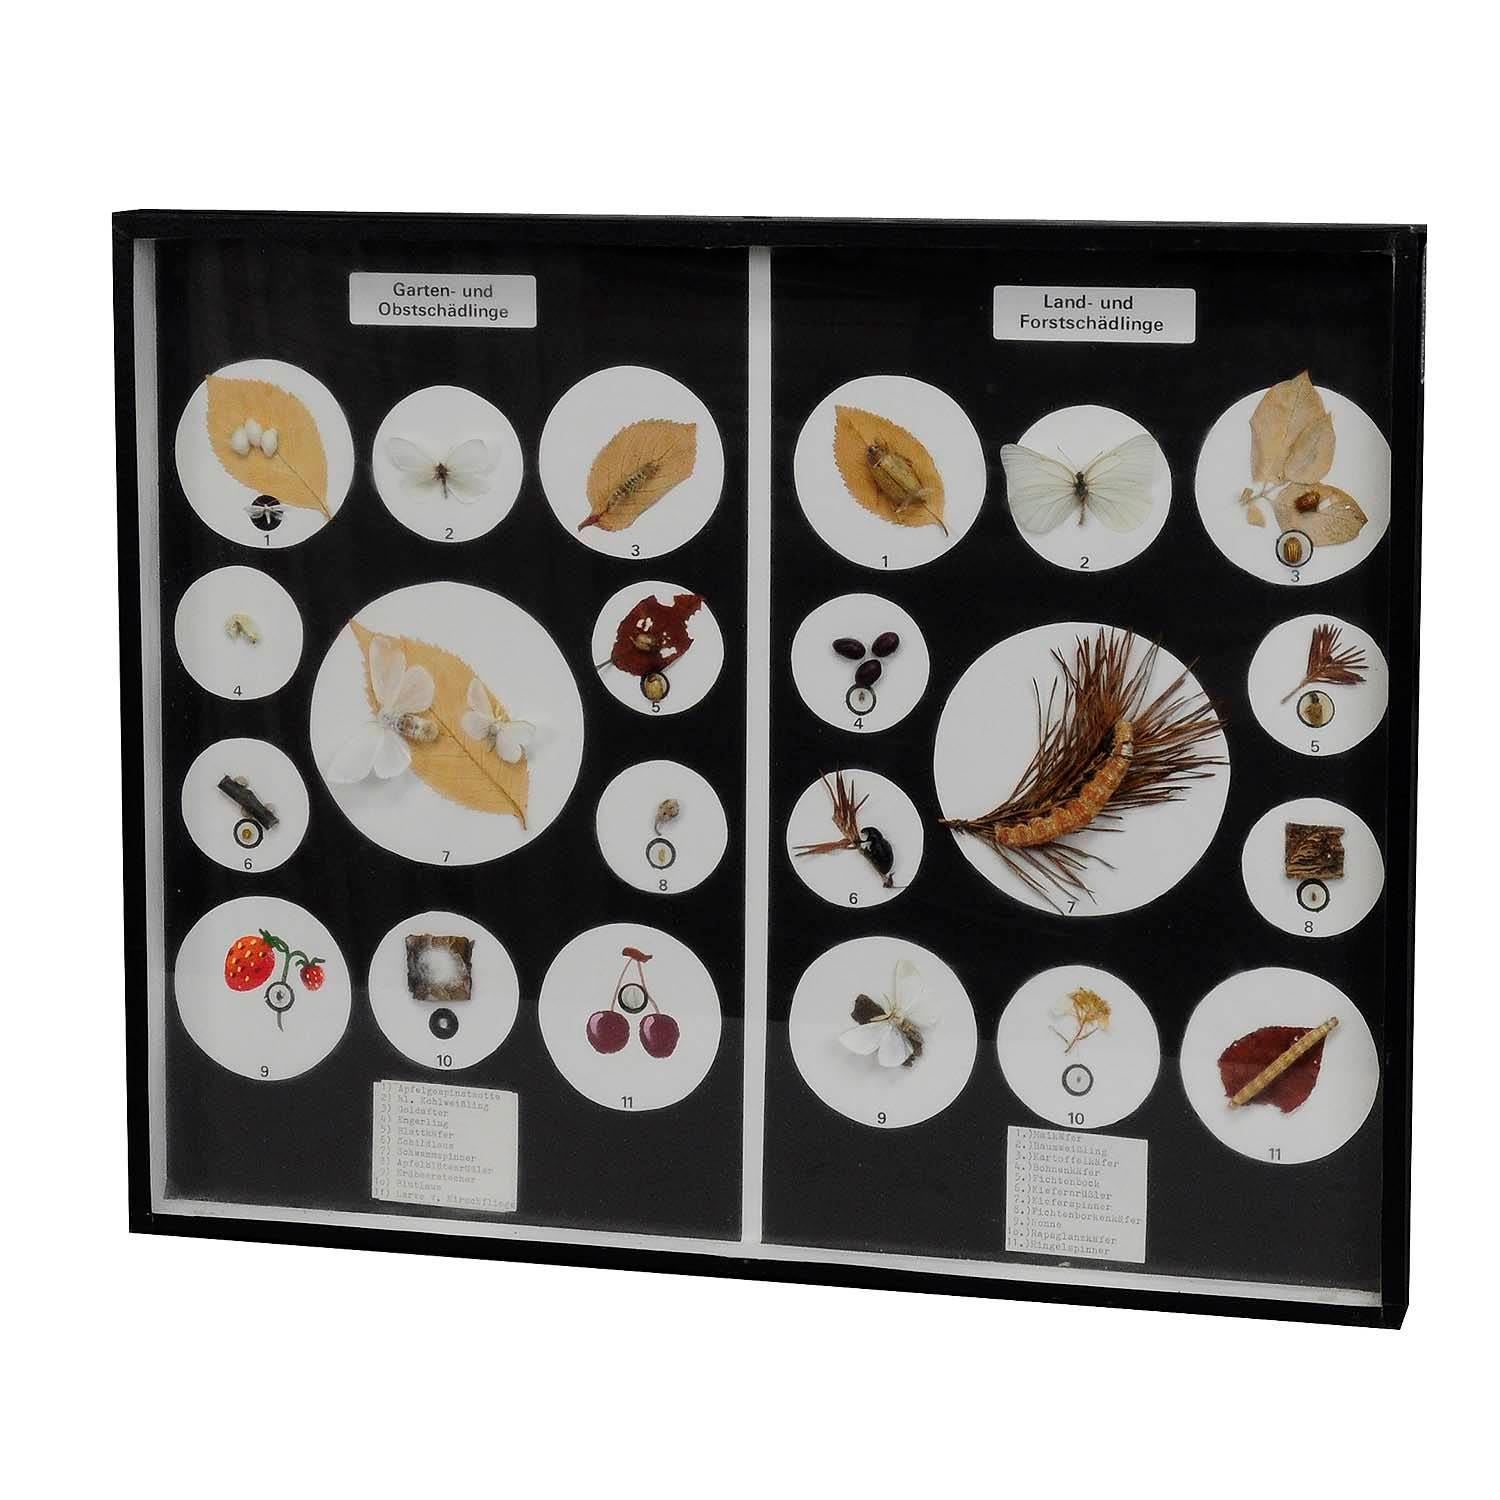 Great Vintage School Teaching Display Vermins in the Garden and Forest

A vintage school teaching showcase with specimen illustrating the pests in the garden and in the forest. Used as teaching material in German schools ca. 1960. Paper lables with